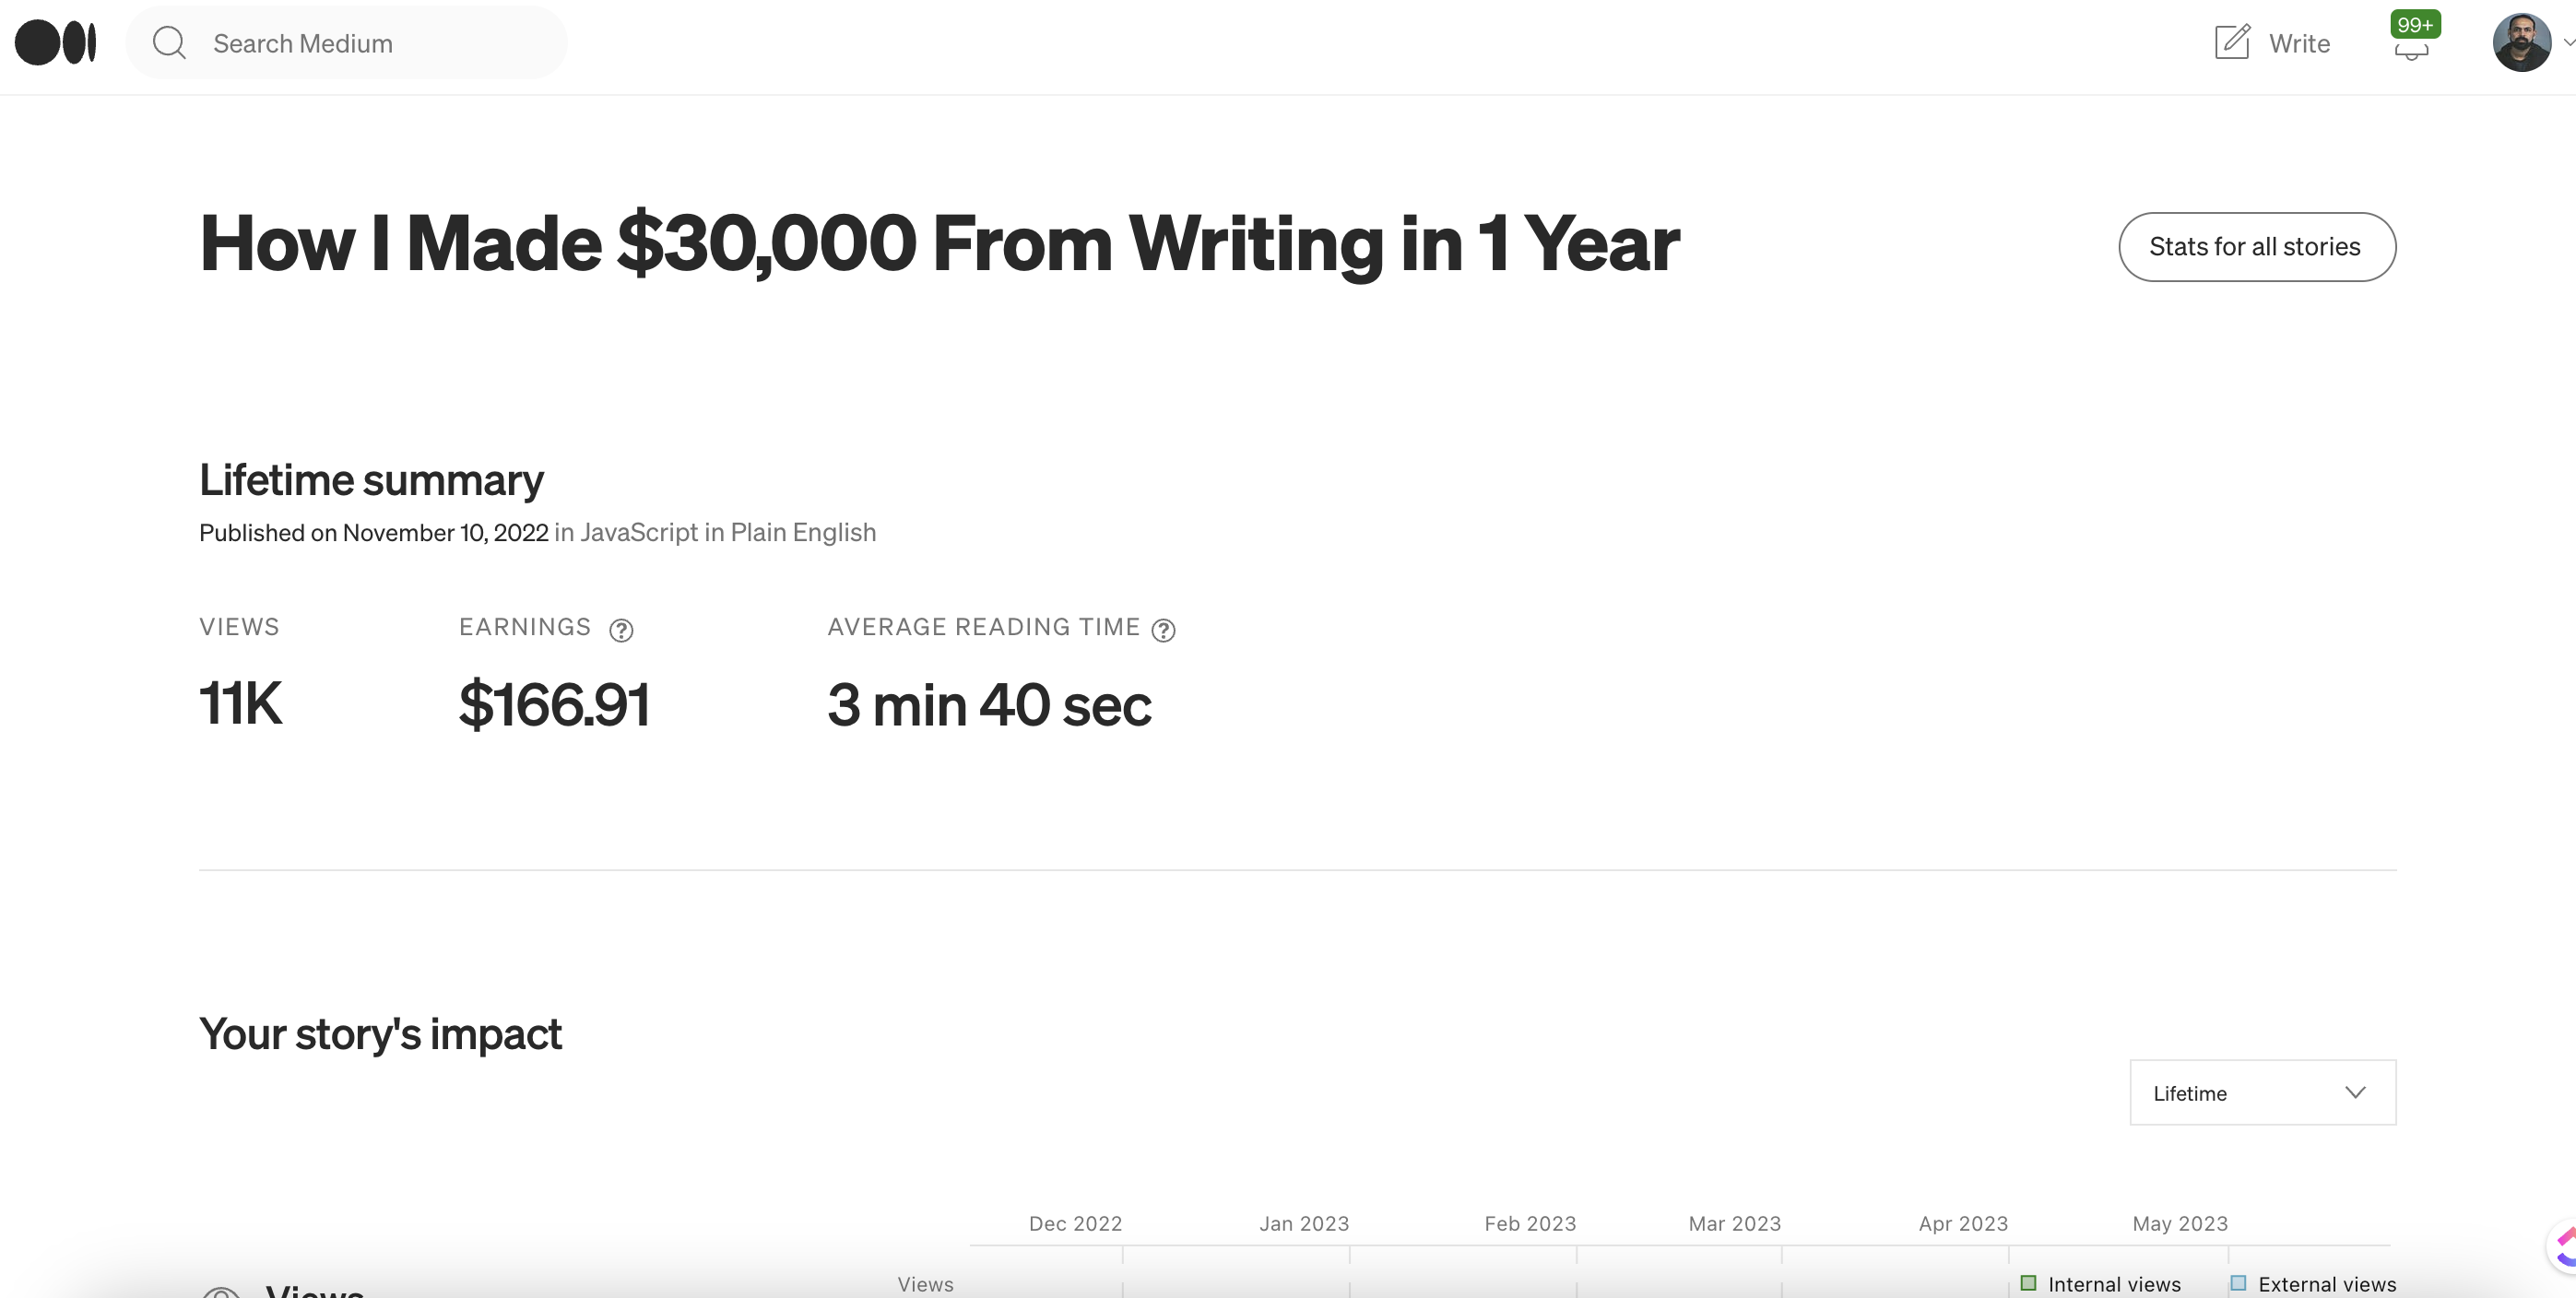 How I Made $30,000 From Writing in 1 Year
